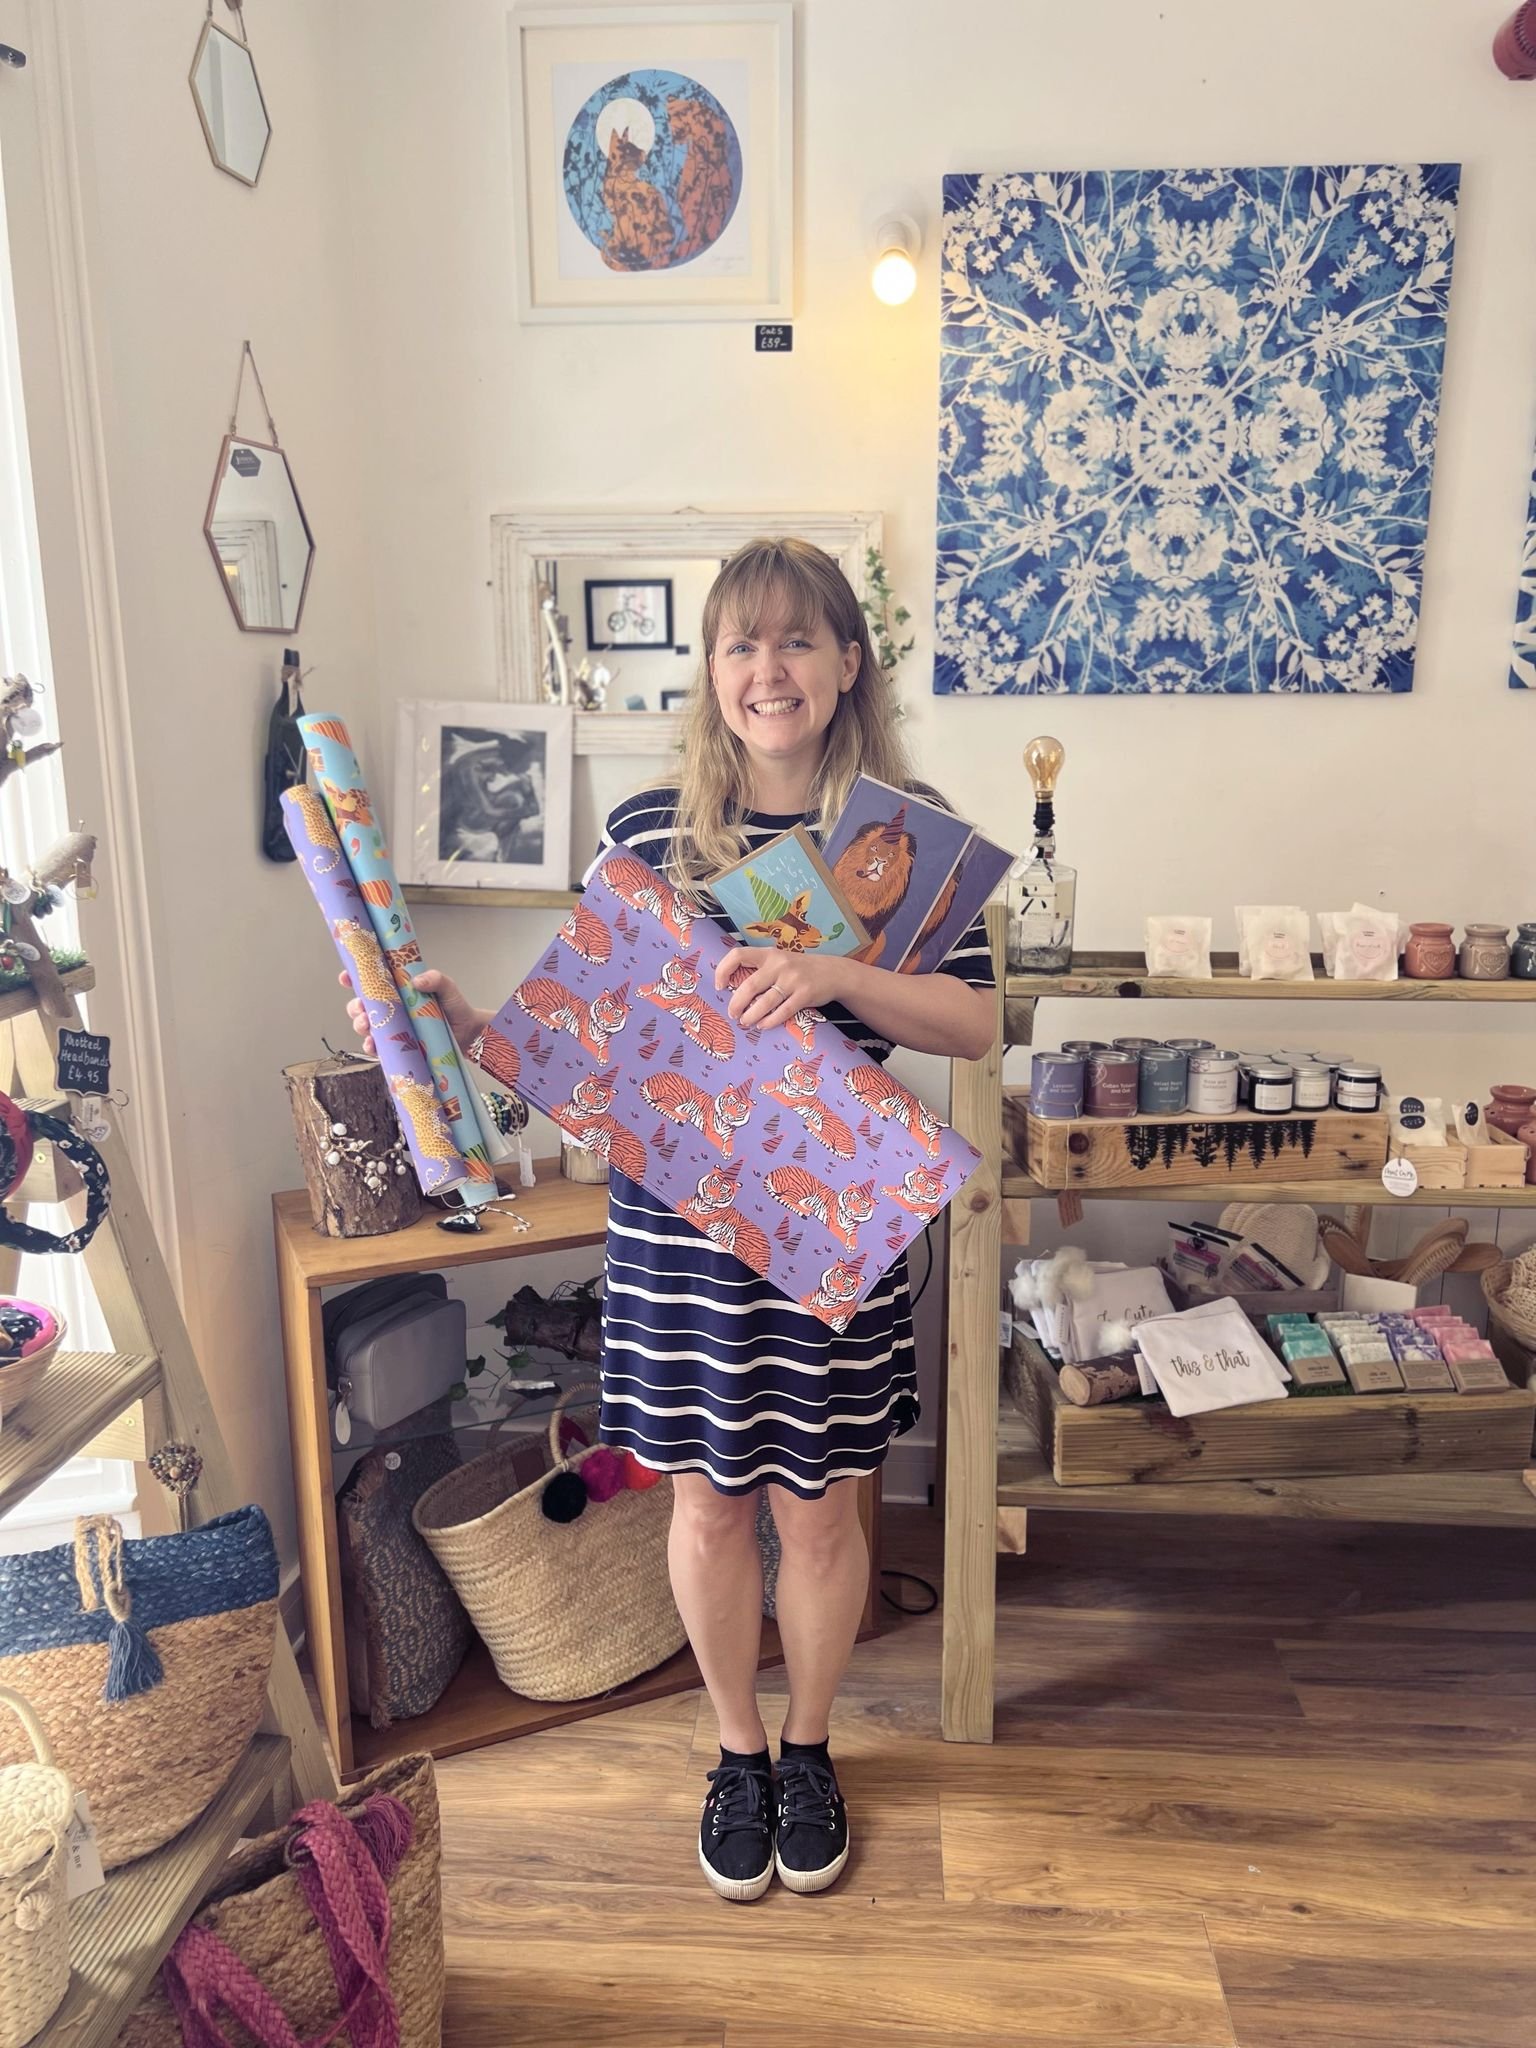 Corrina Ann Art Wholesale Order. Corrina Holding her Wholesale Order of Animal Wrapping Paper and Greeting Cards.jpg